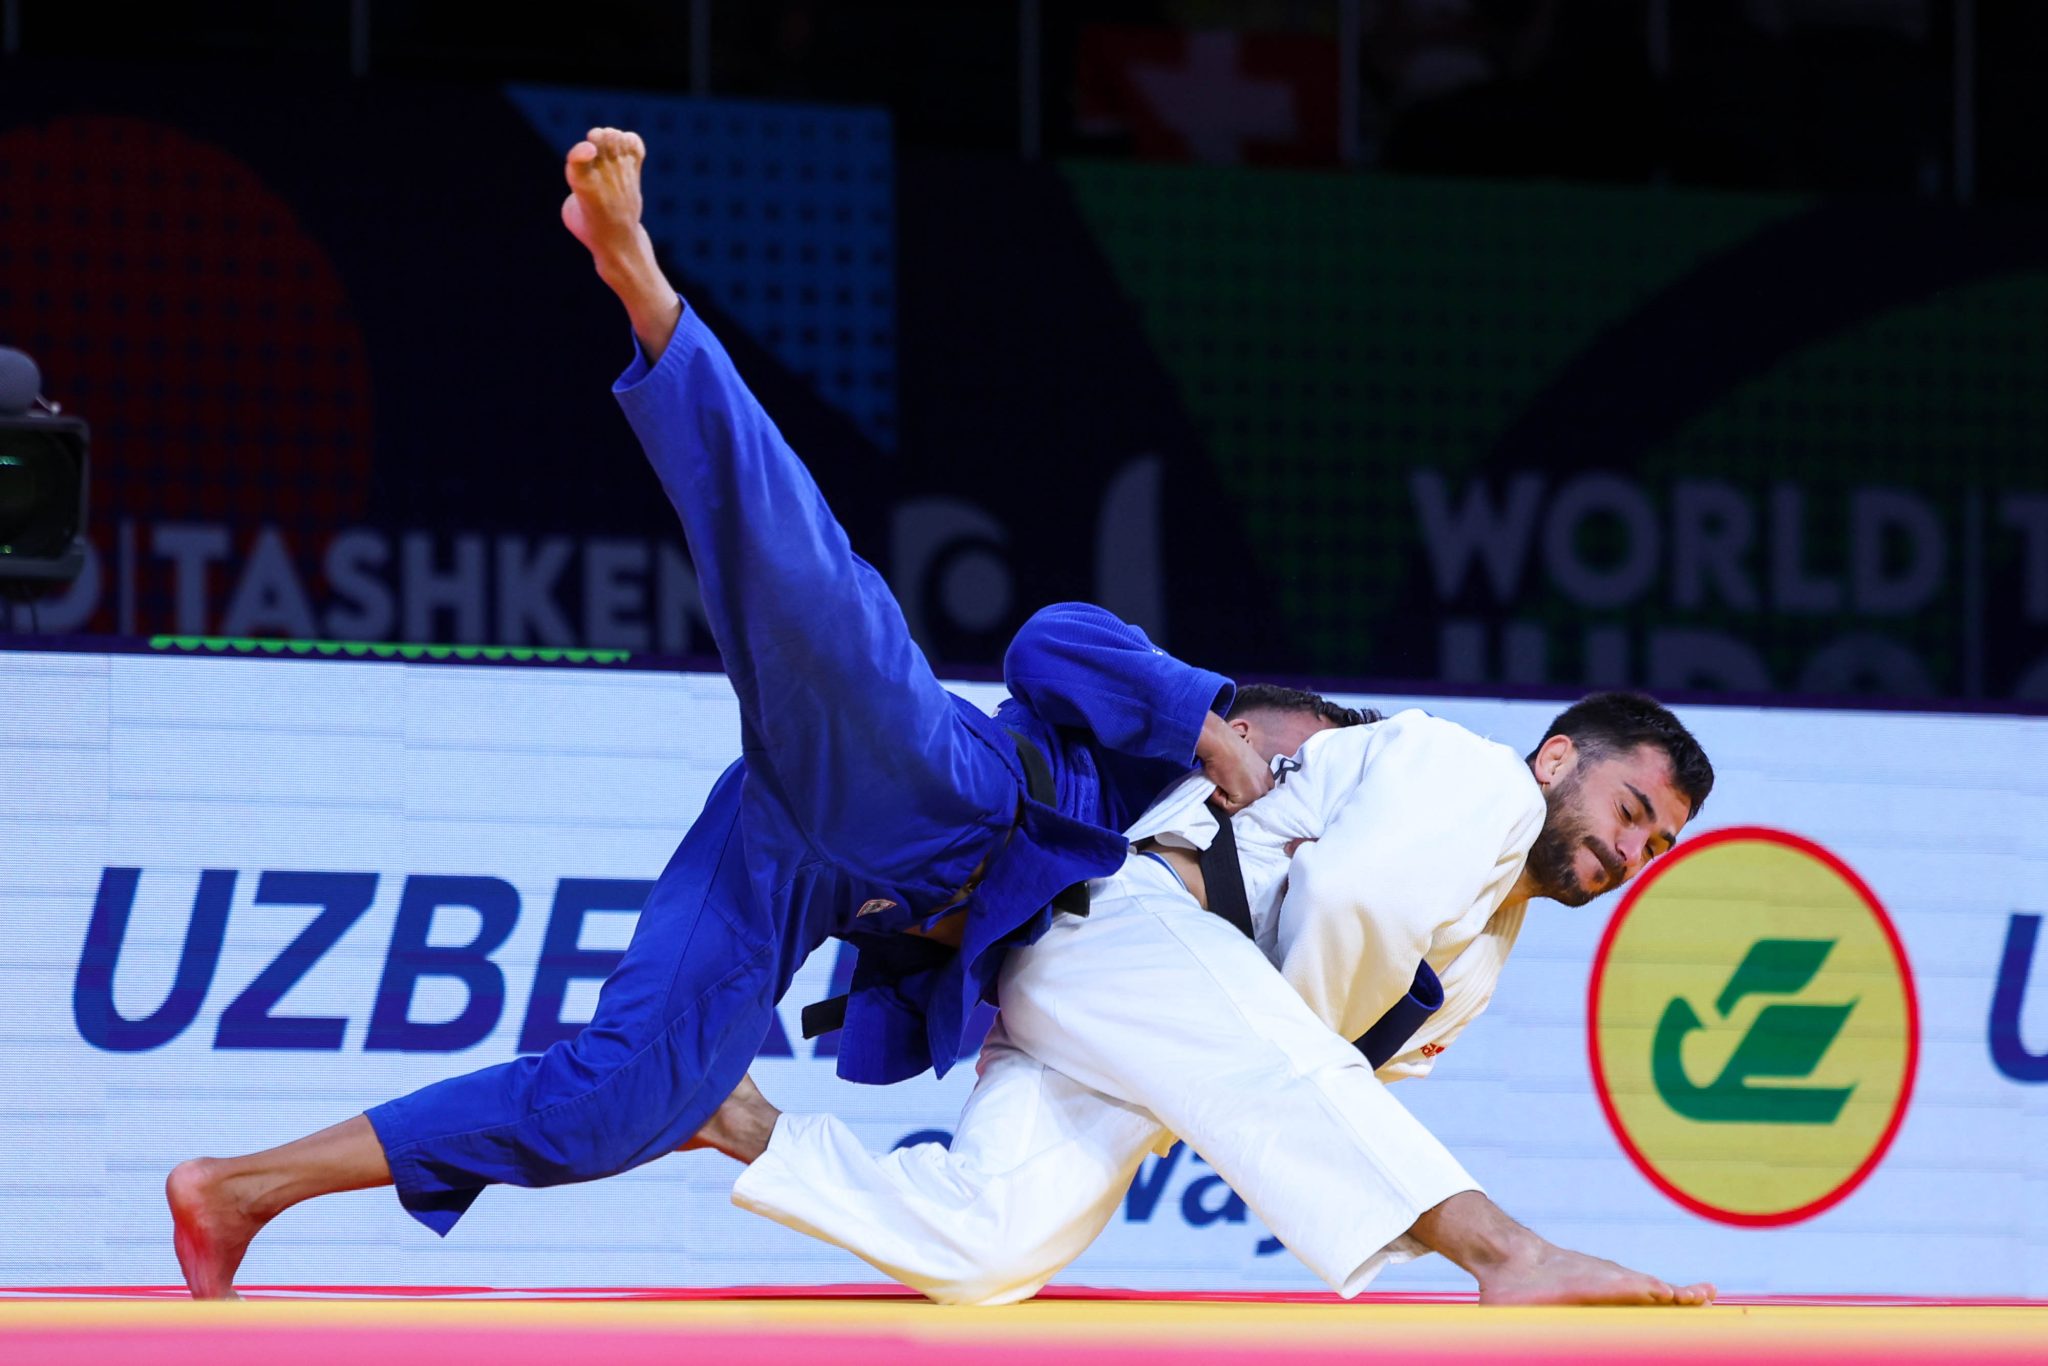 EUROPE IMPROVE MEDAL POTENTIAL ON SECOND DAY OF WORLDS